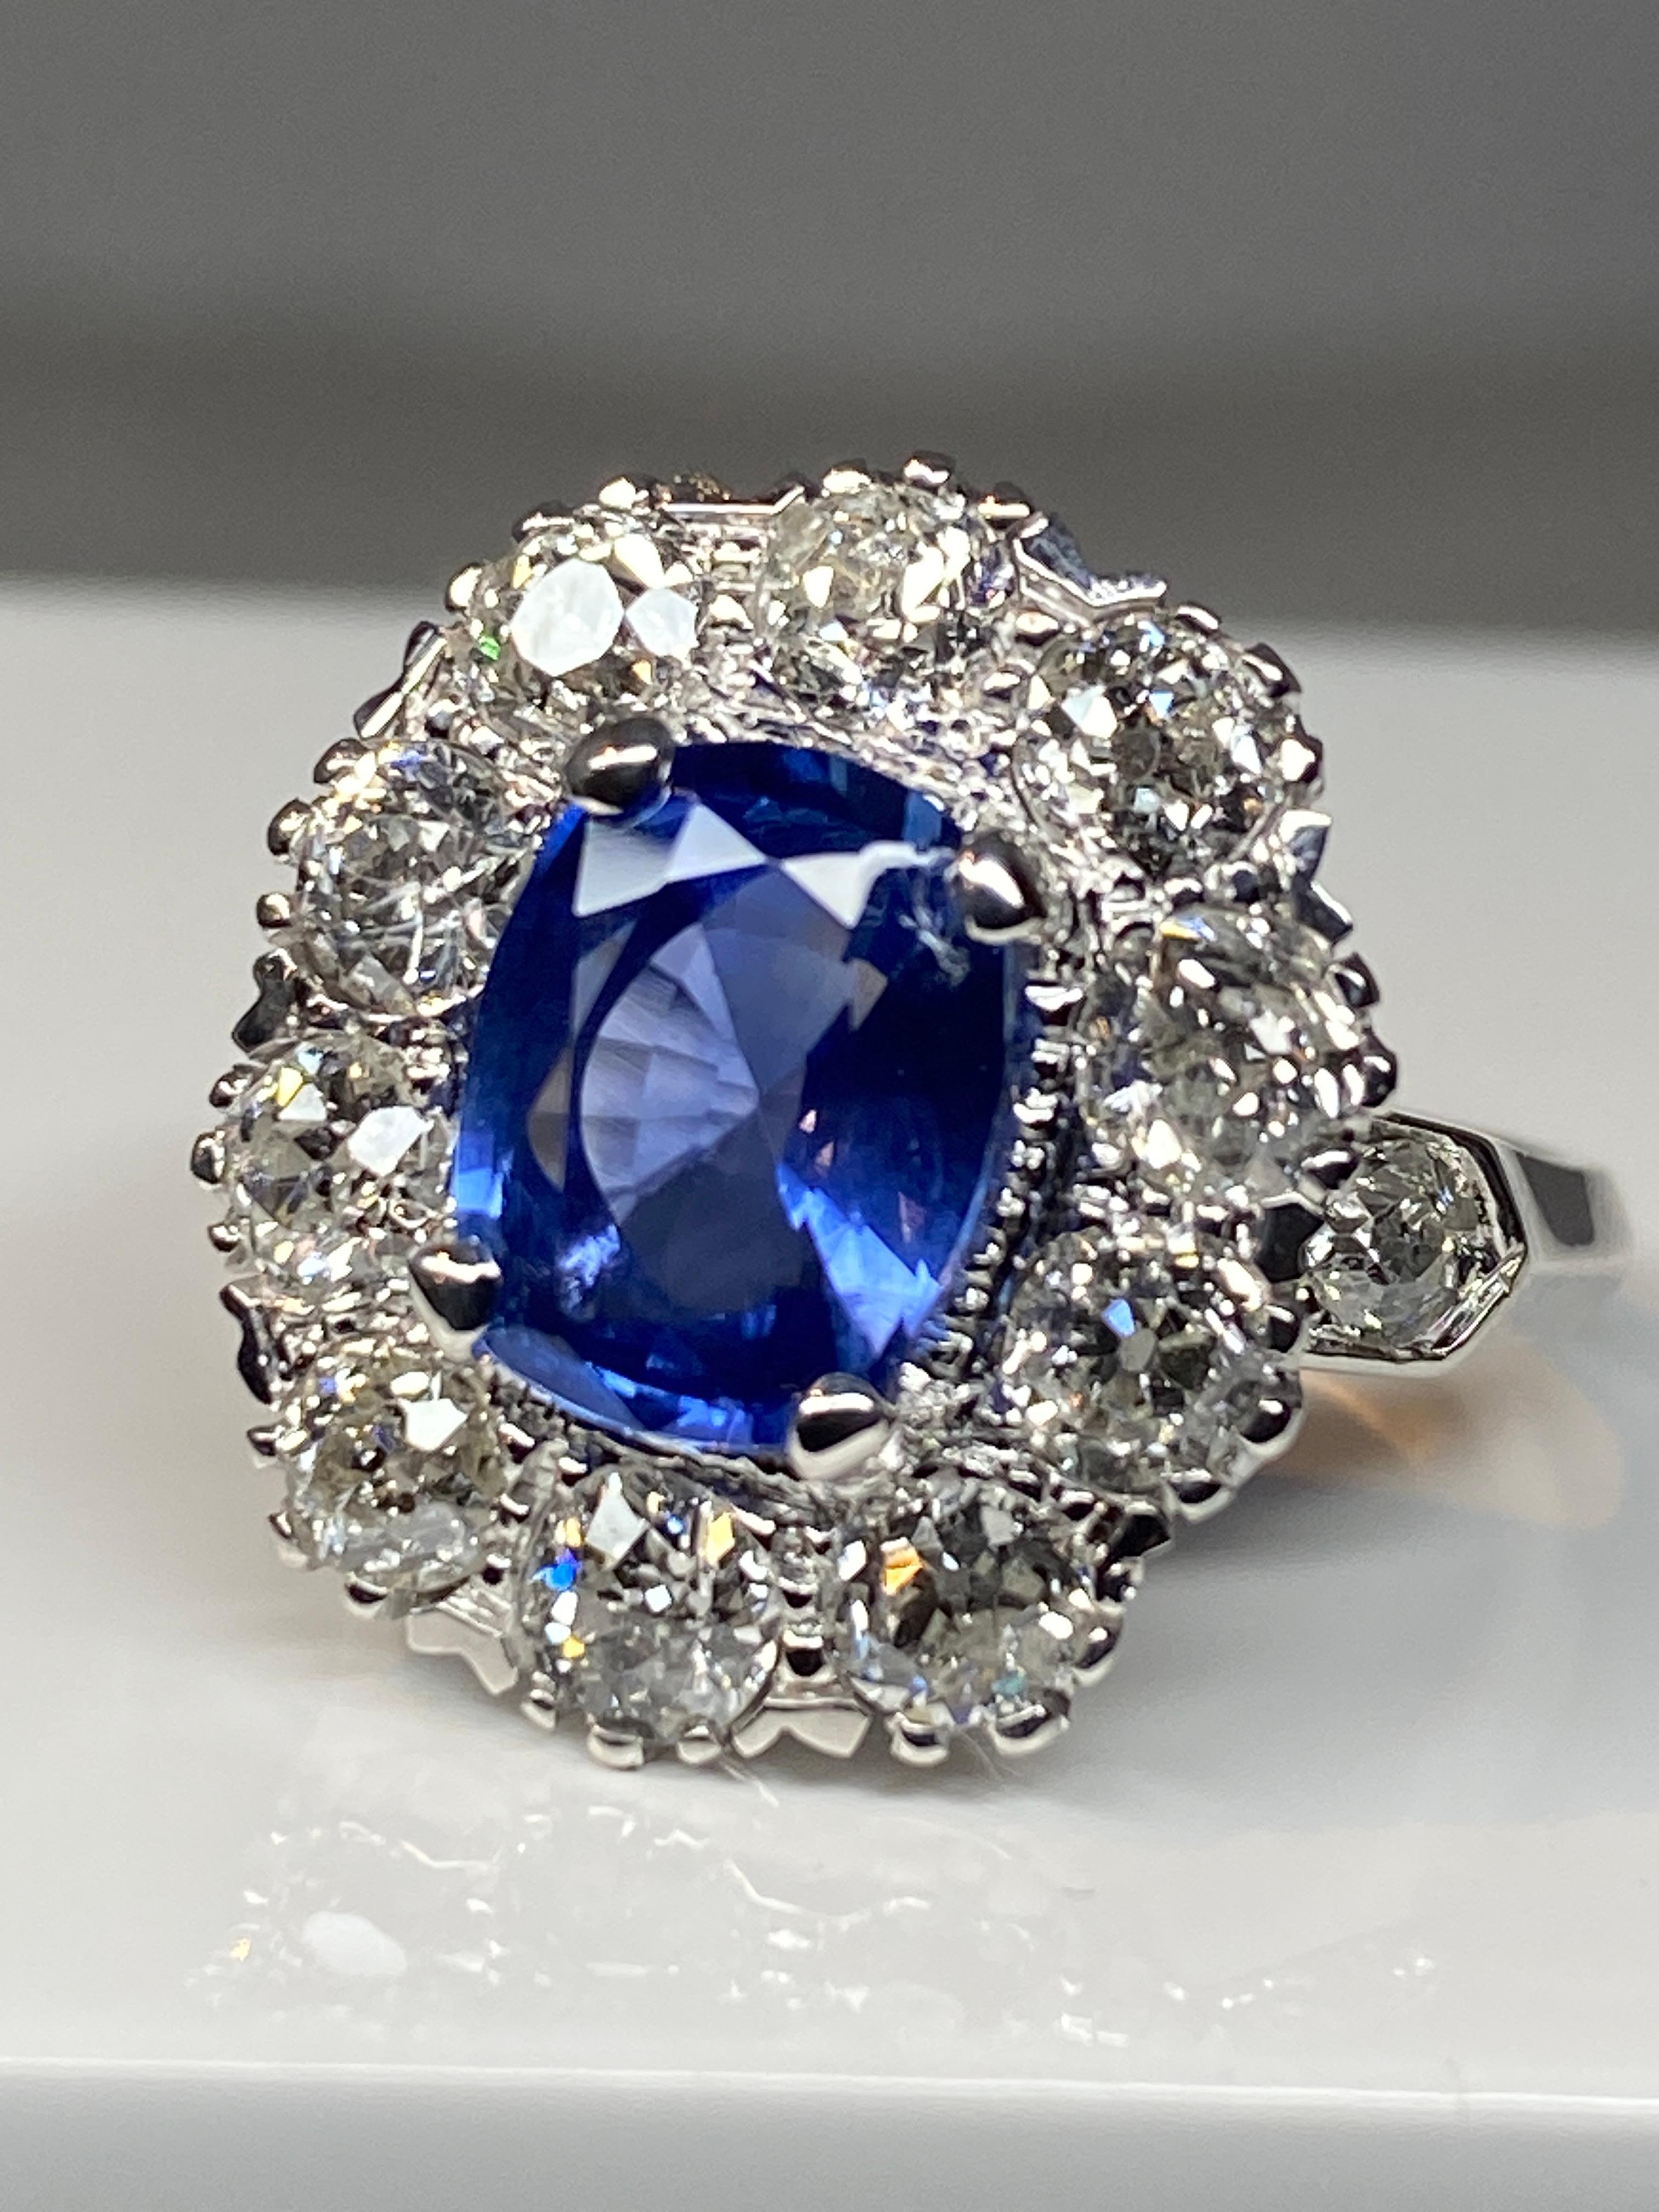 Women's or Men's Engagement Ring in 18 Carat Gold, 'Pompadour' with Sapphire and Diamonds